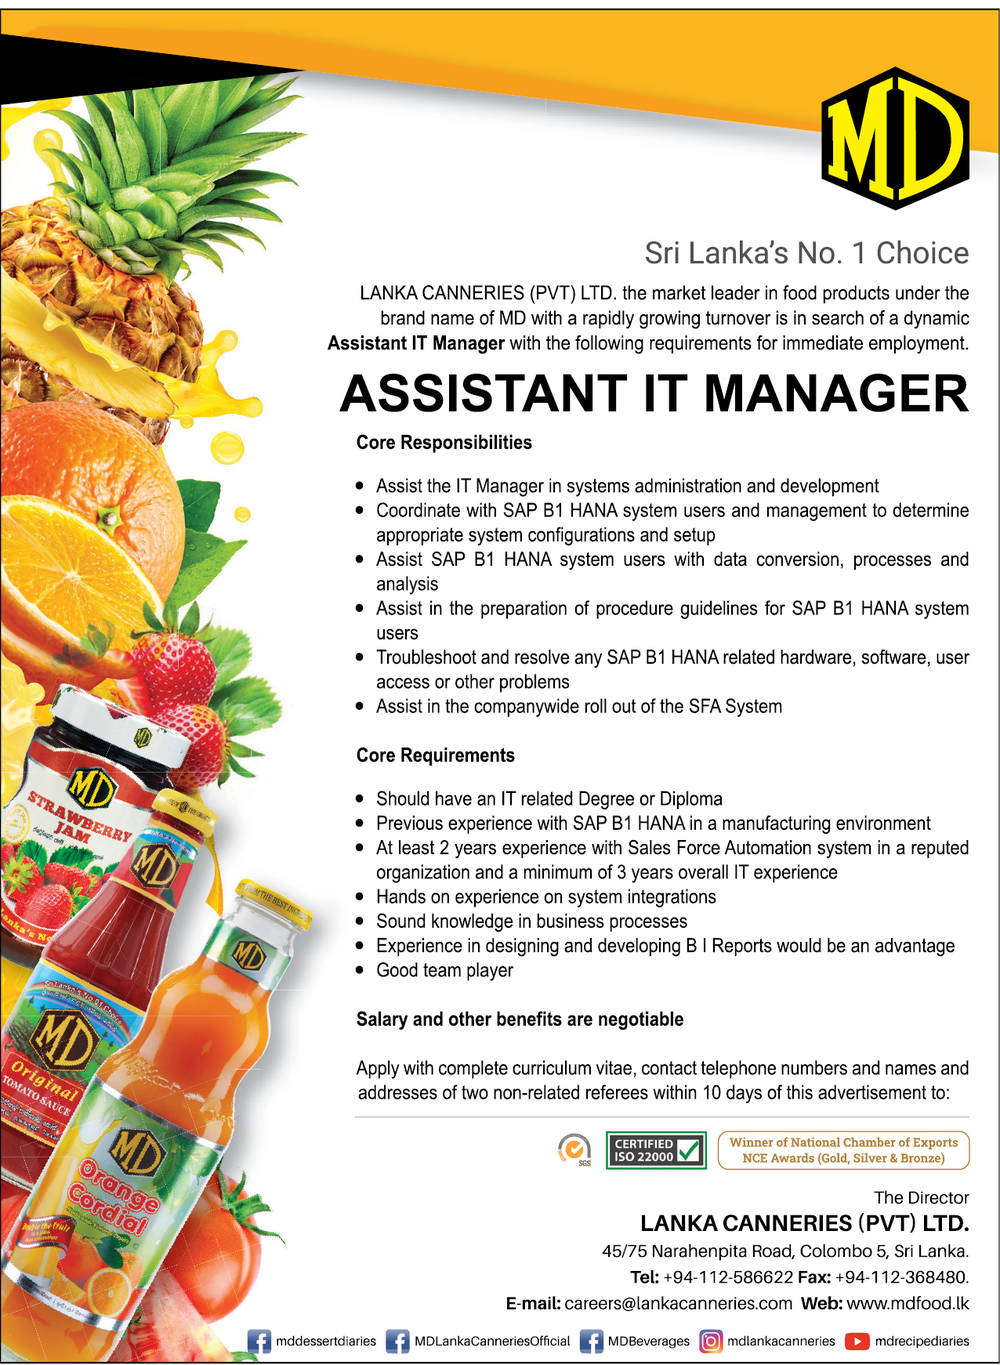 Assistant IT Manager